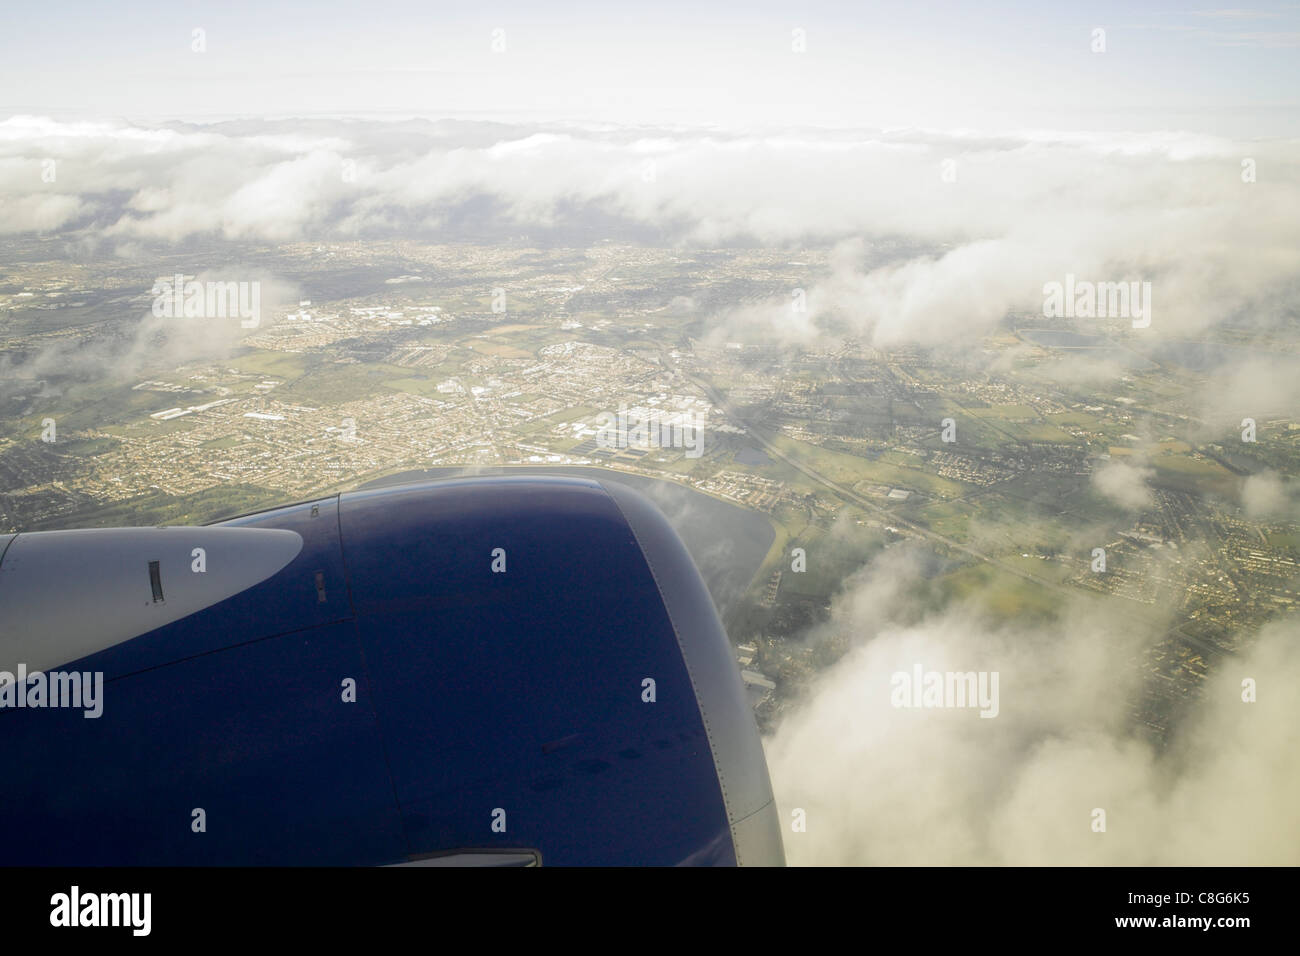 View from passenger aircraft window at  take off, engine in foreground land, fields and roads below through light cloud cover Stock Photo